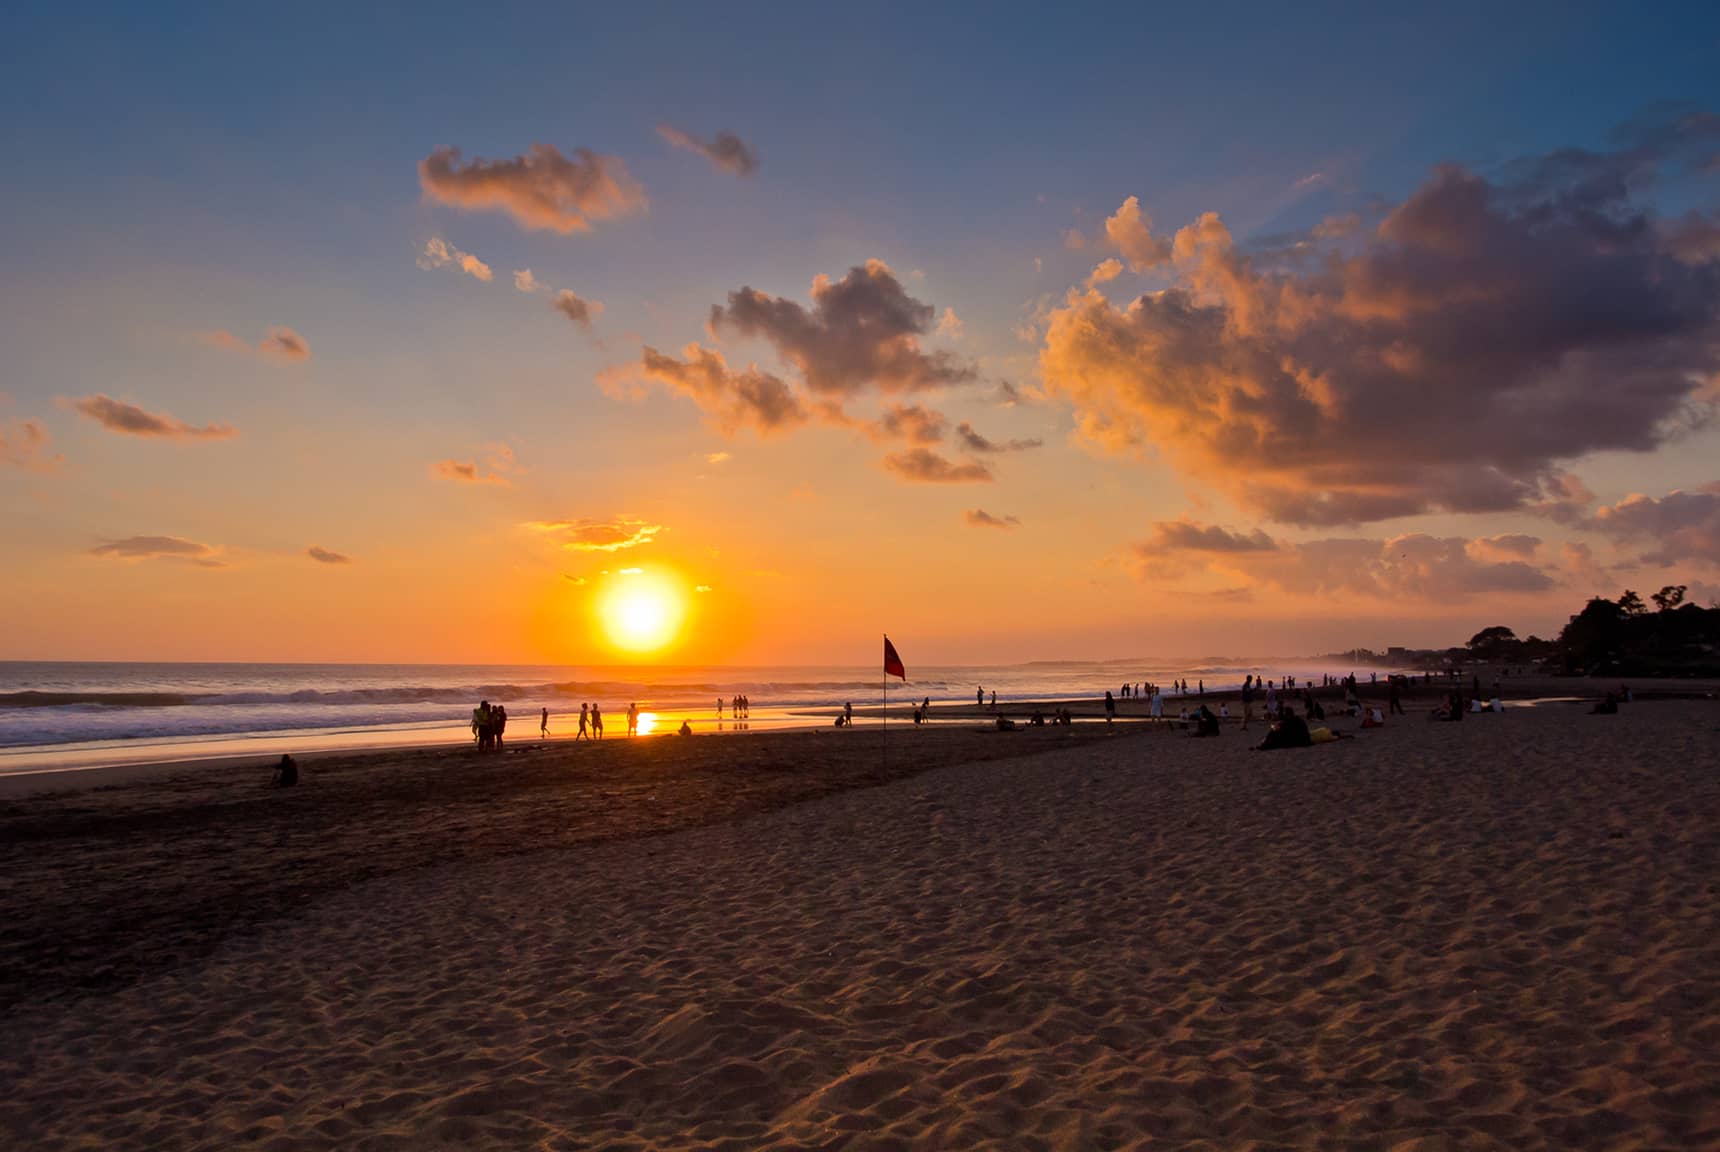 Professional photos of the beaches in Bali Indonesia